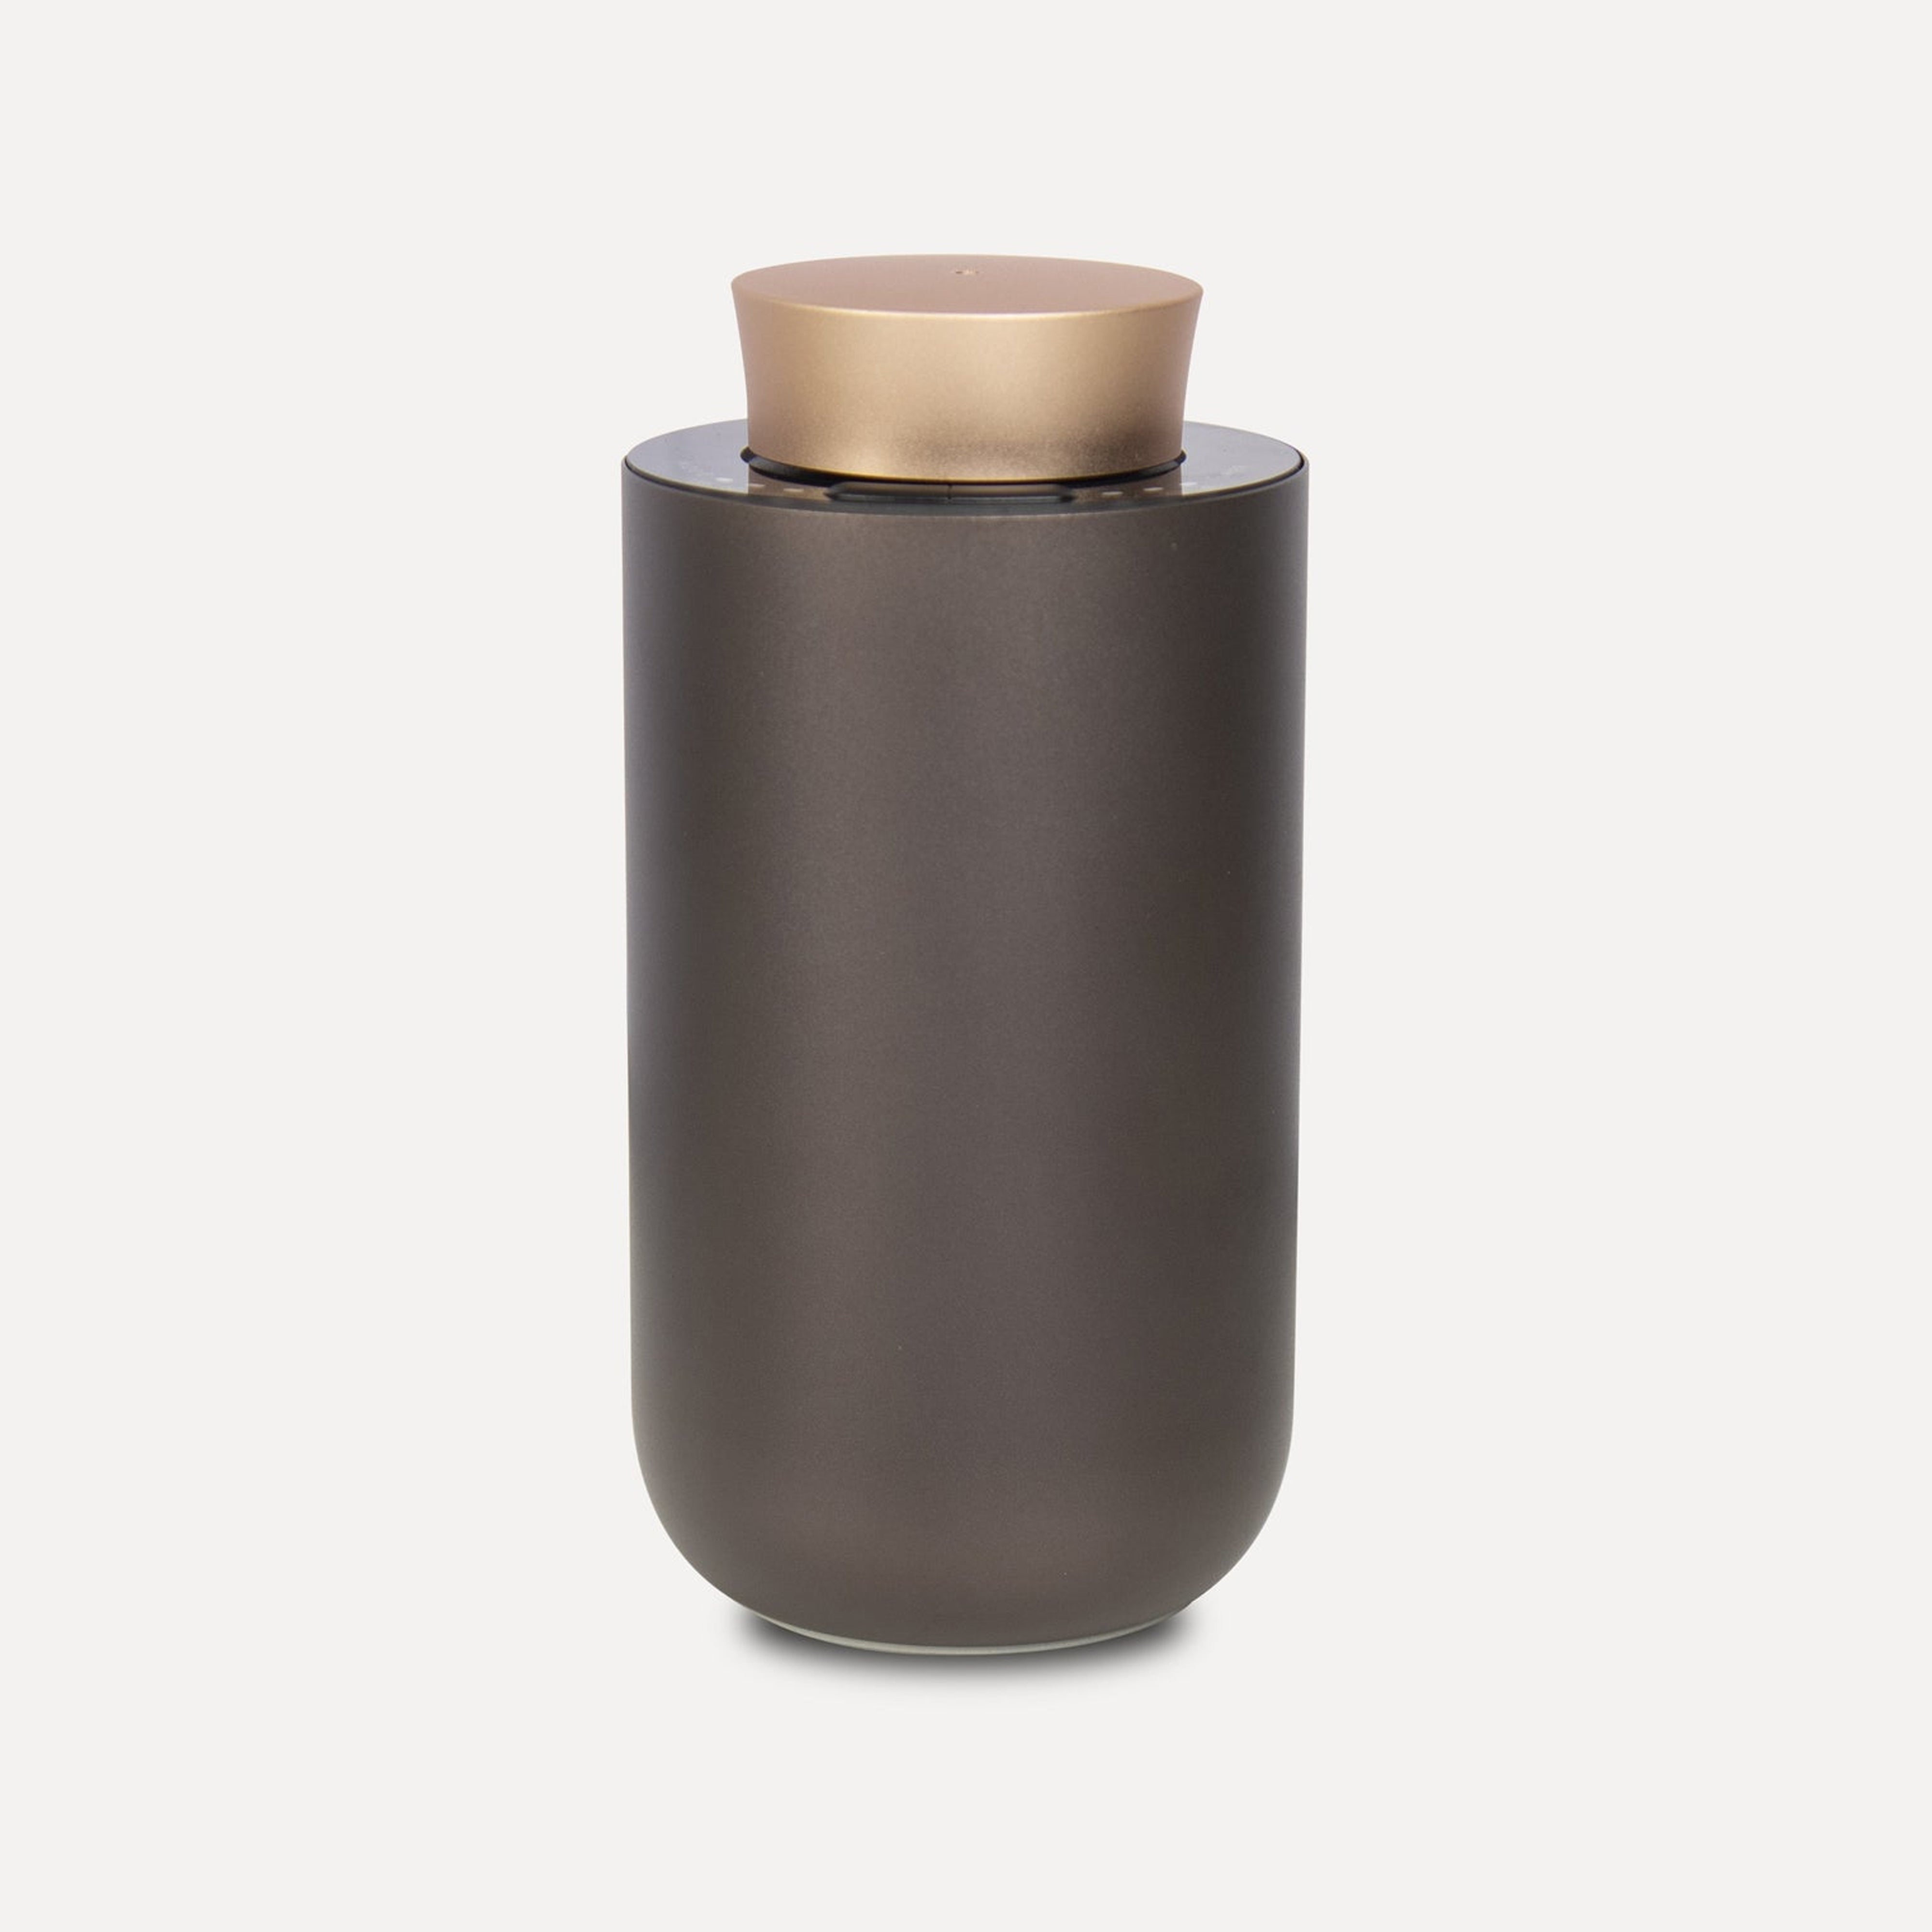 Essential Oil Diffuser (Brown Gold) - VAUCLUSE